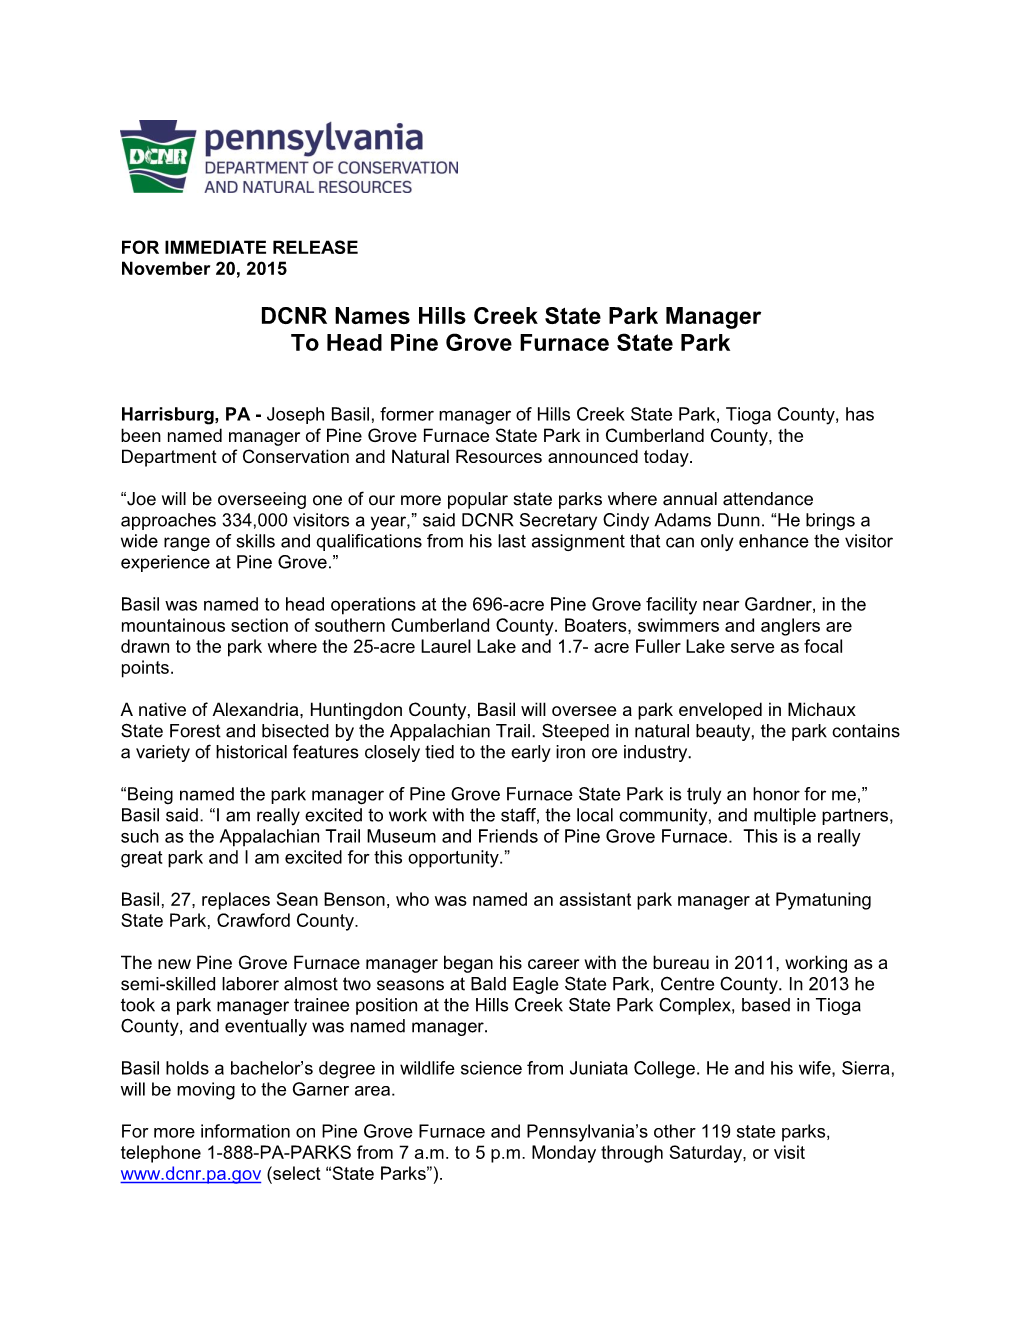 DCNR Names Hills Creek State Park Manager to Head Pine Grove Furnace State Park